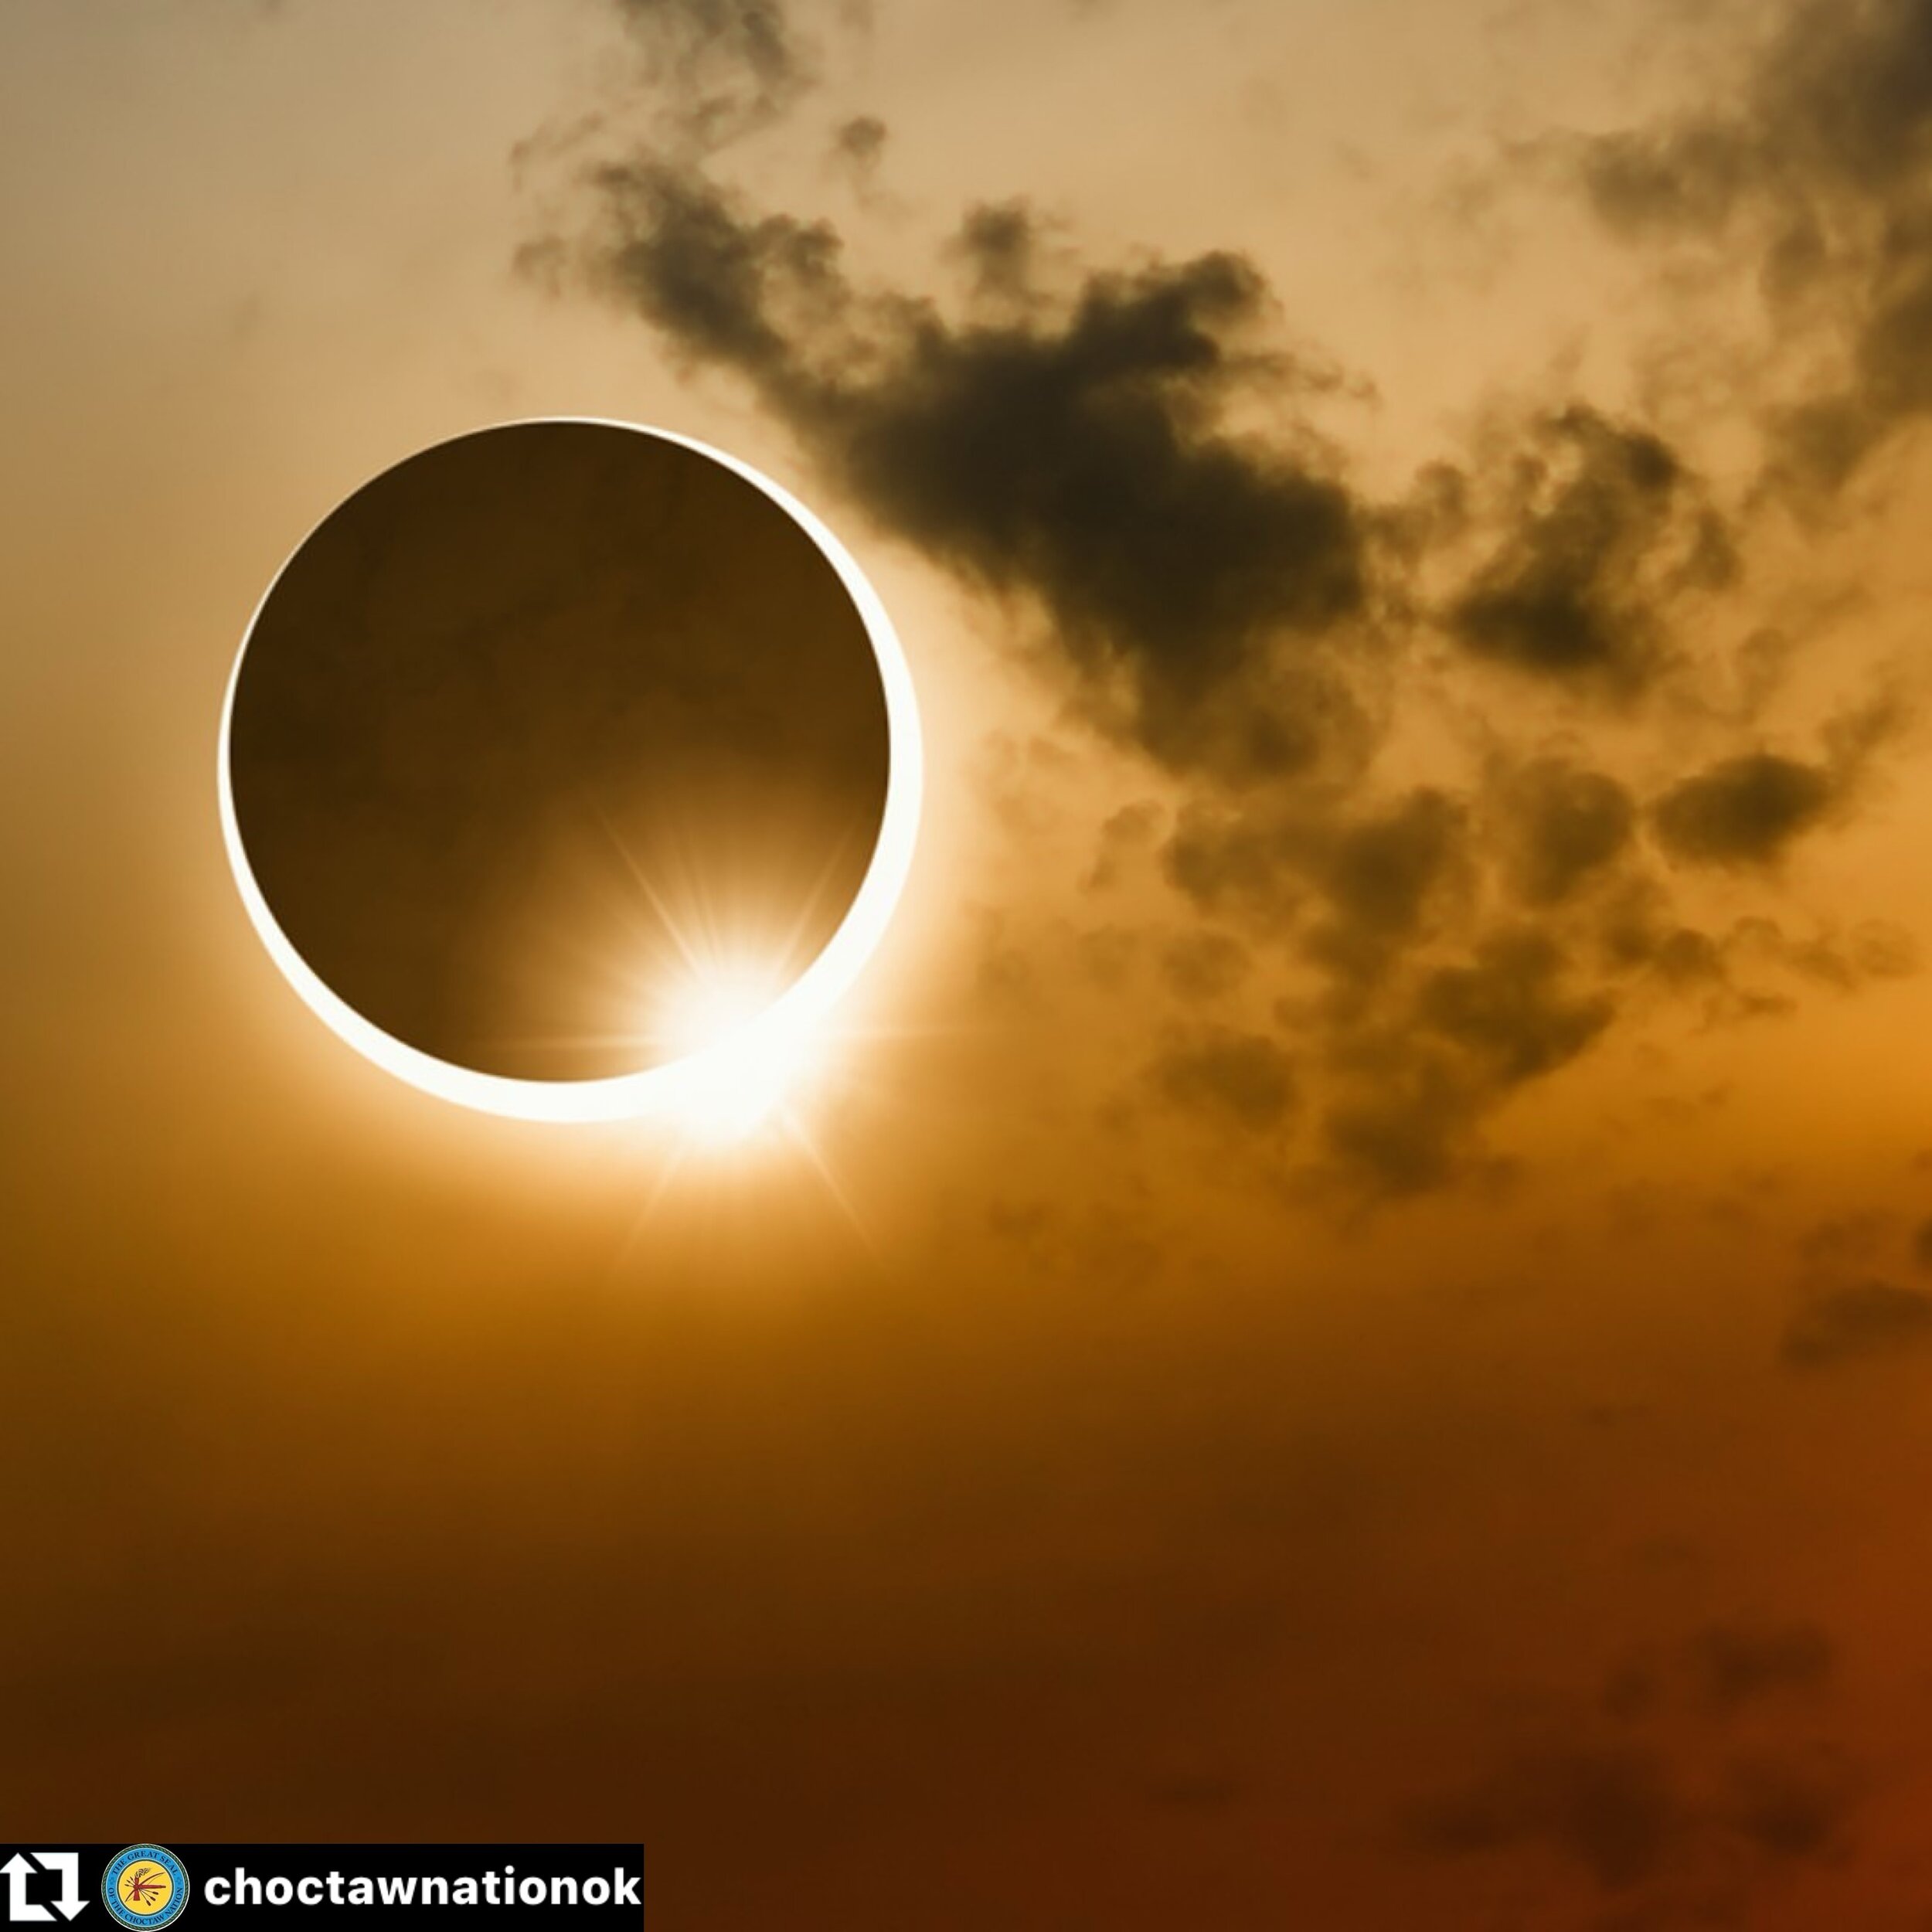 #repost @choctawnationok &ldquo;A total solar eclipse will cross Choctaw Country, bringing thousands to a rare celestial event where viewers can see afternoon skies darken and an illuminated halo appear. The solar eclipse promises to be an exciting e